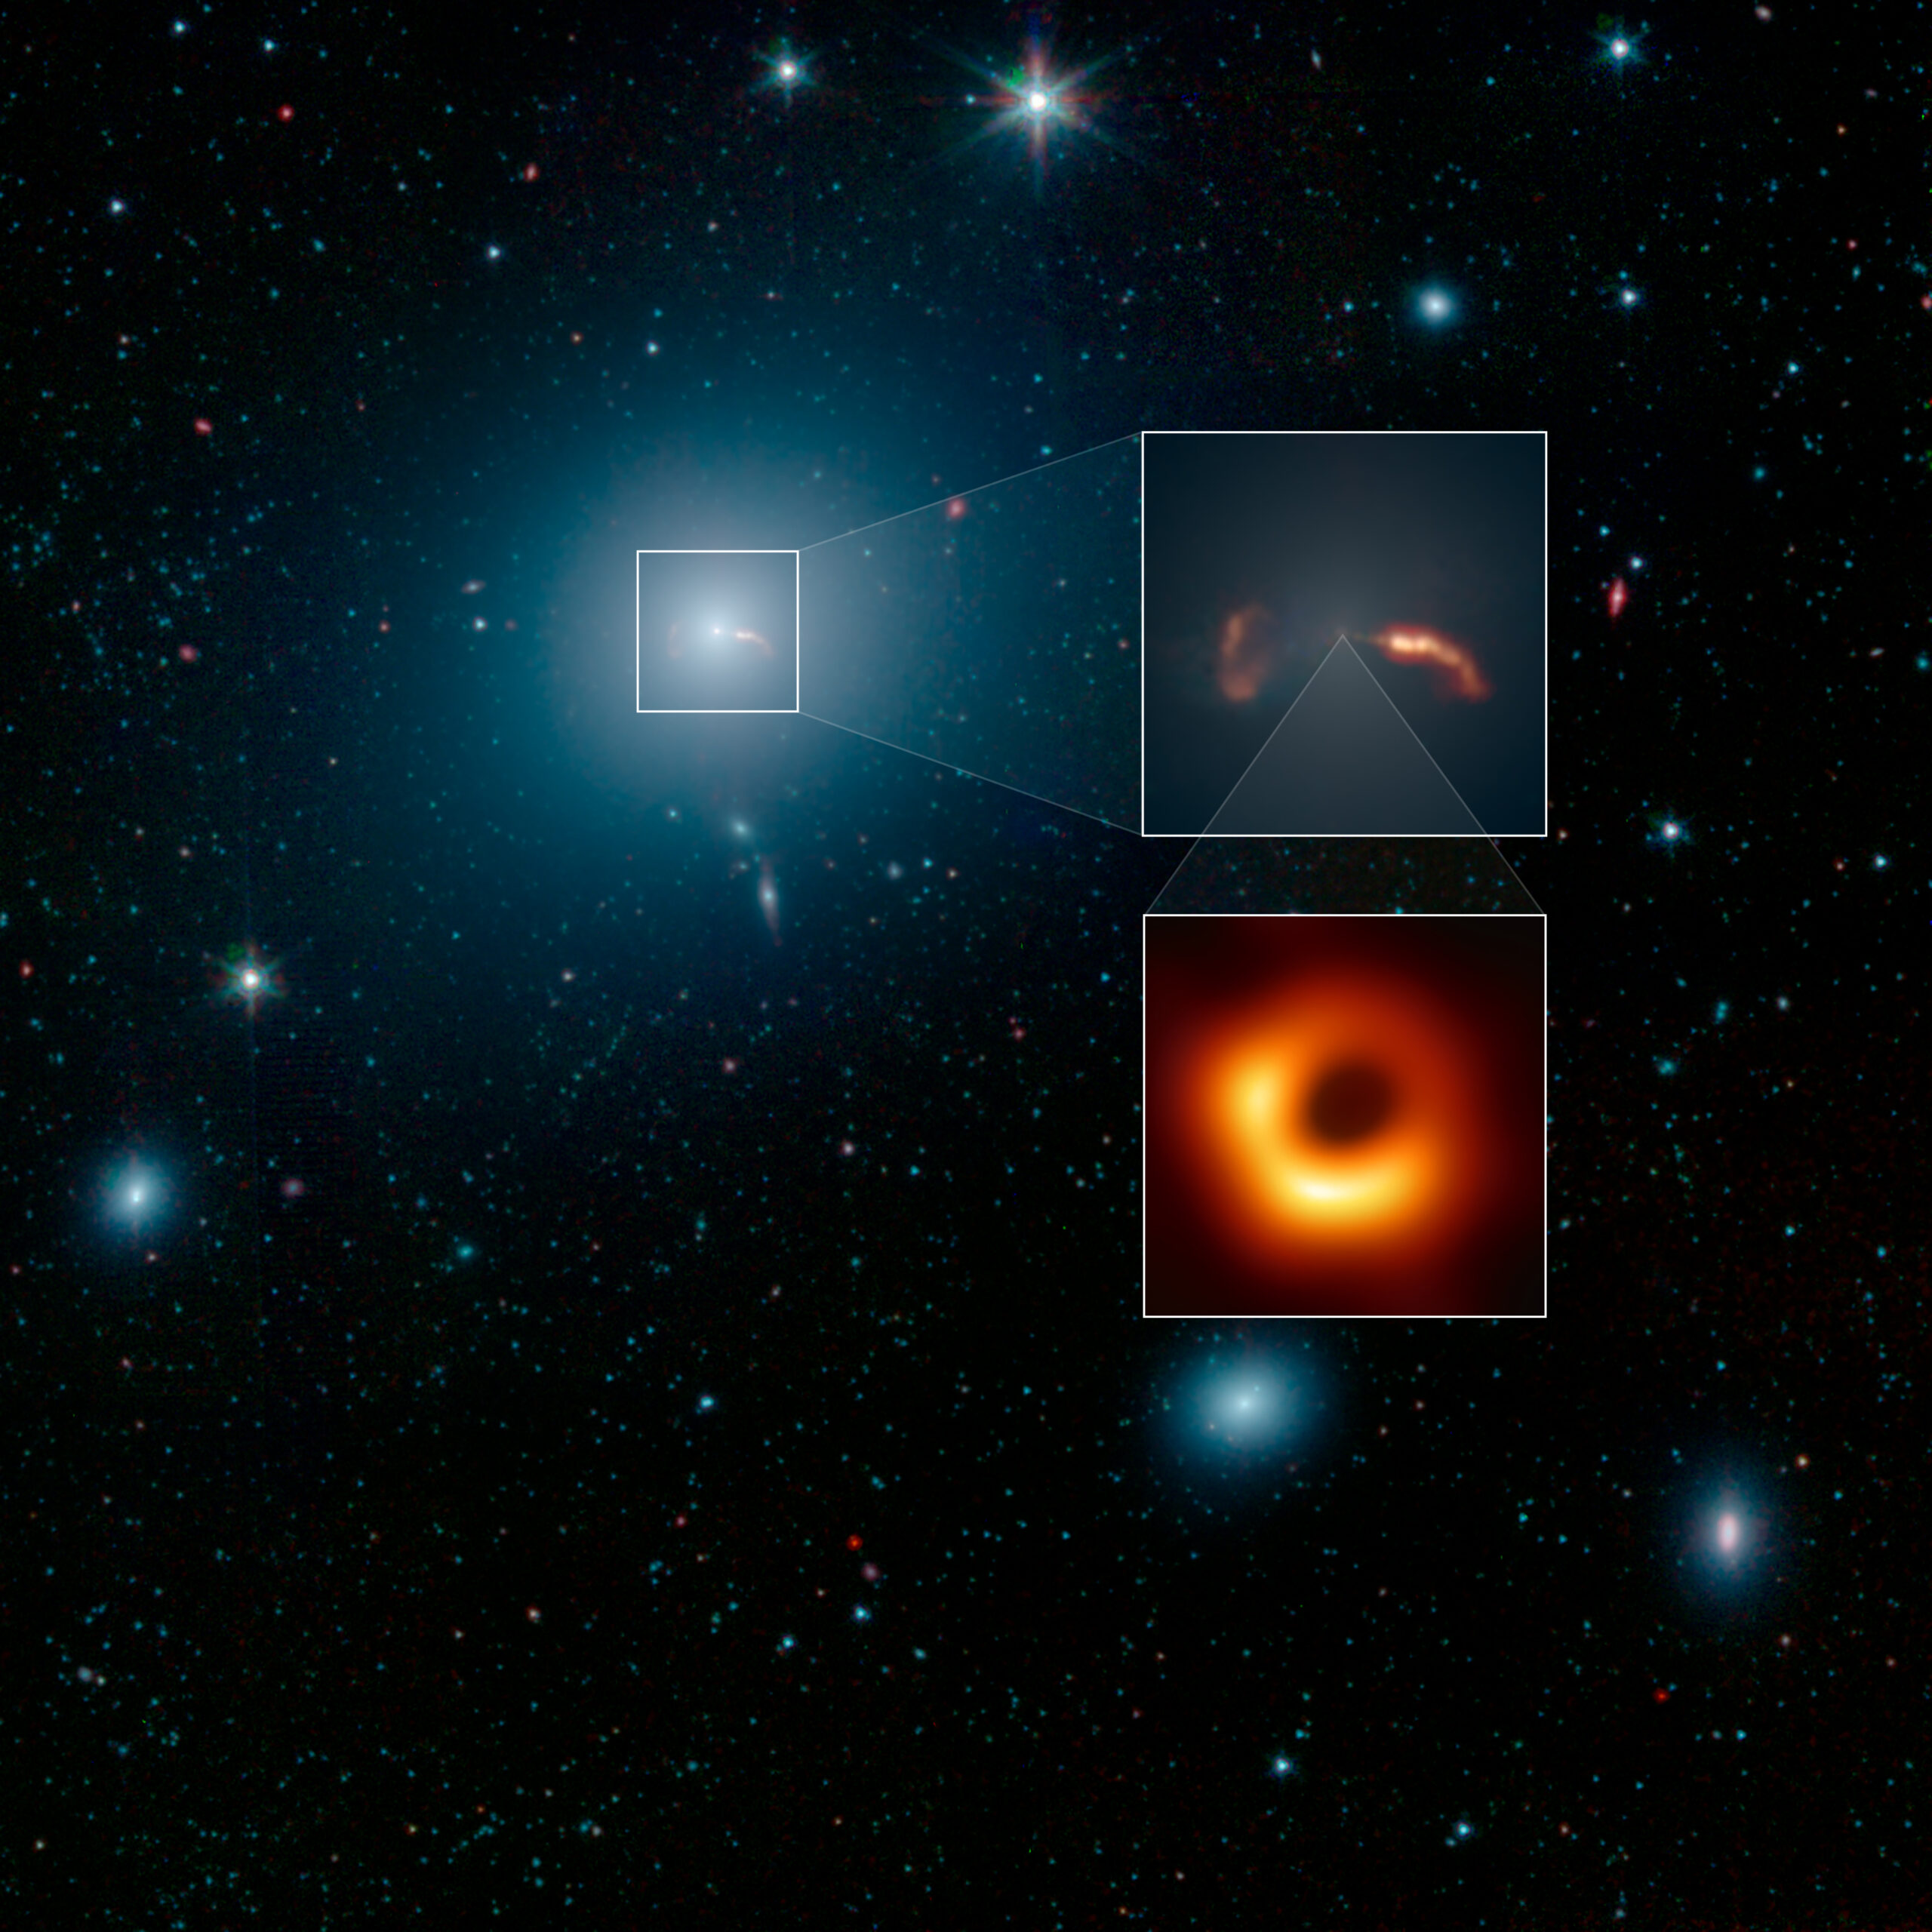 M87 the elliptical galaxy and the Black Hole